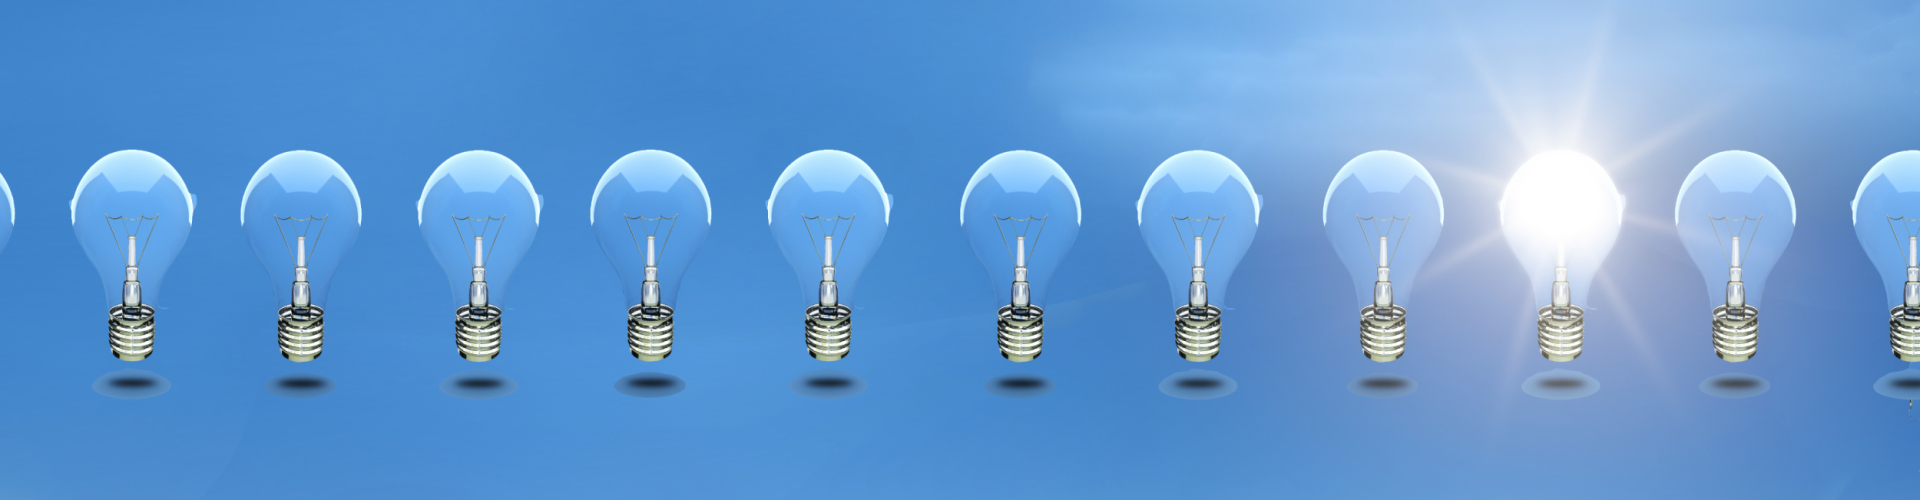 lightbulbs concept for crm best practices